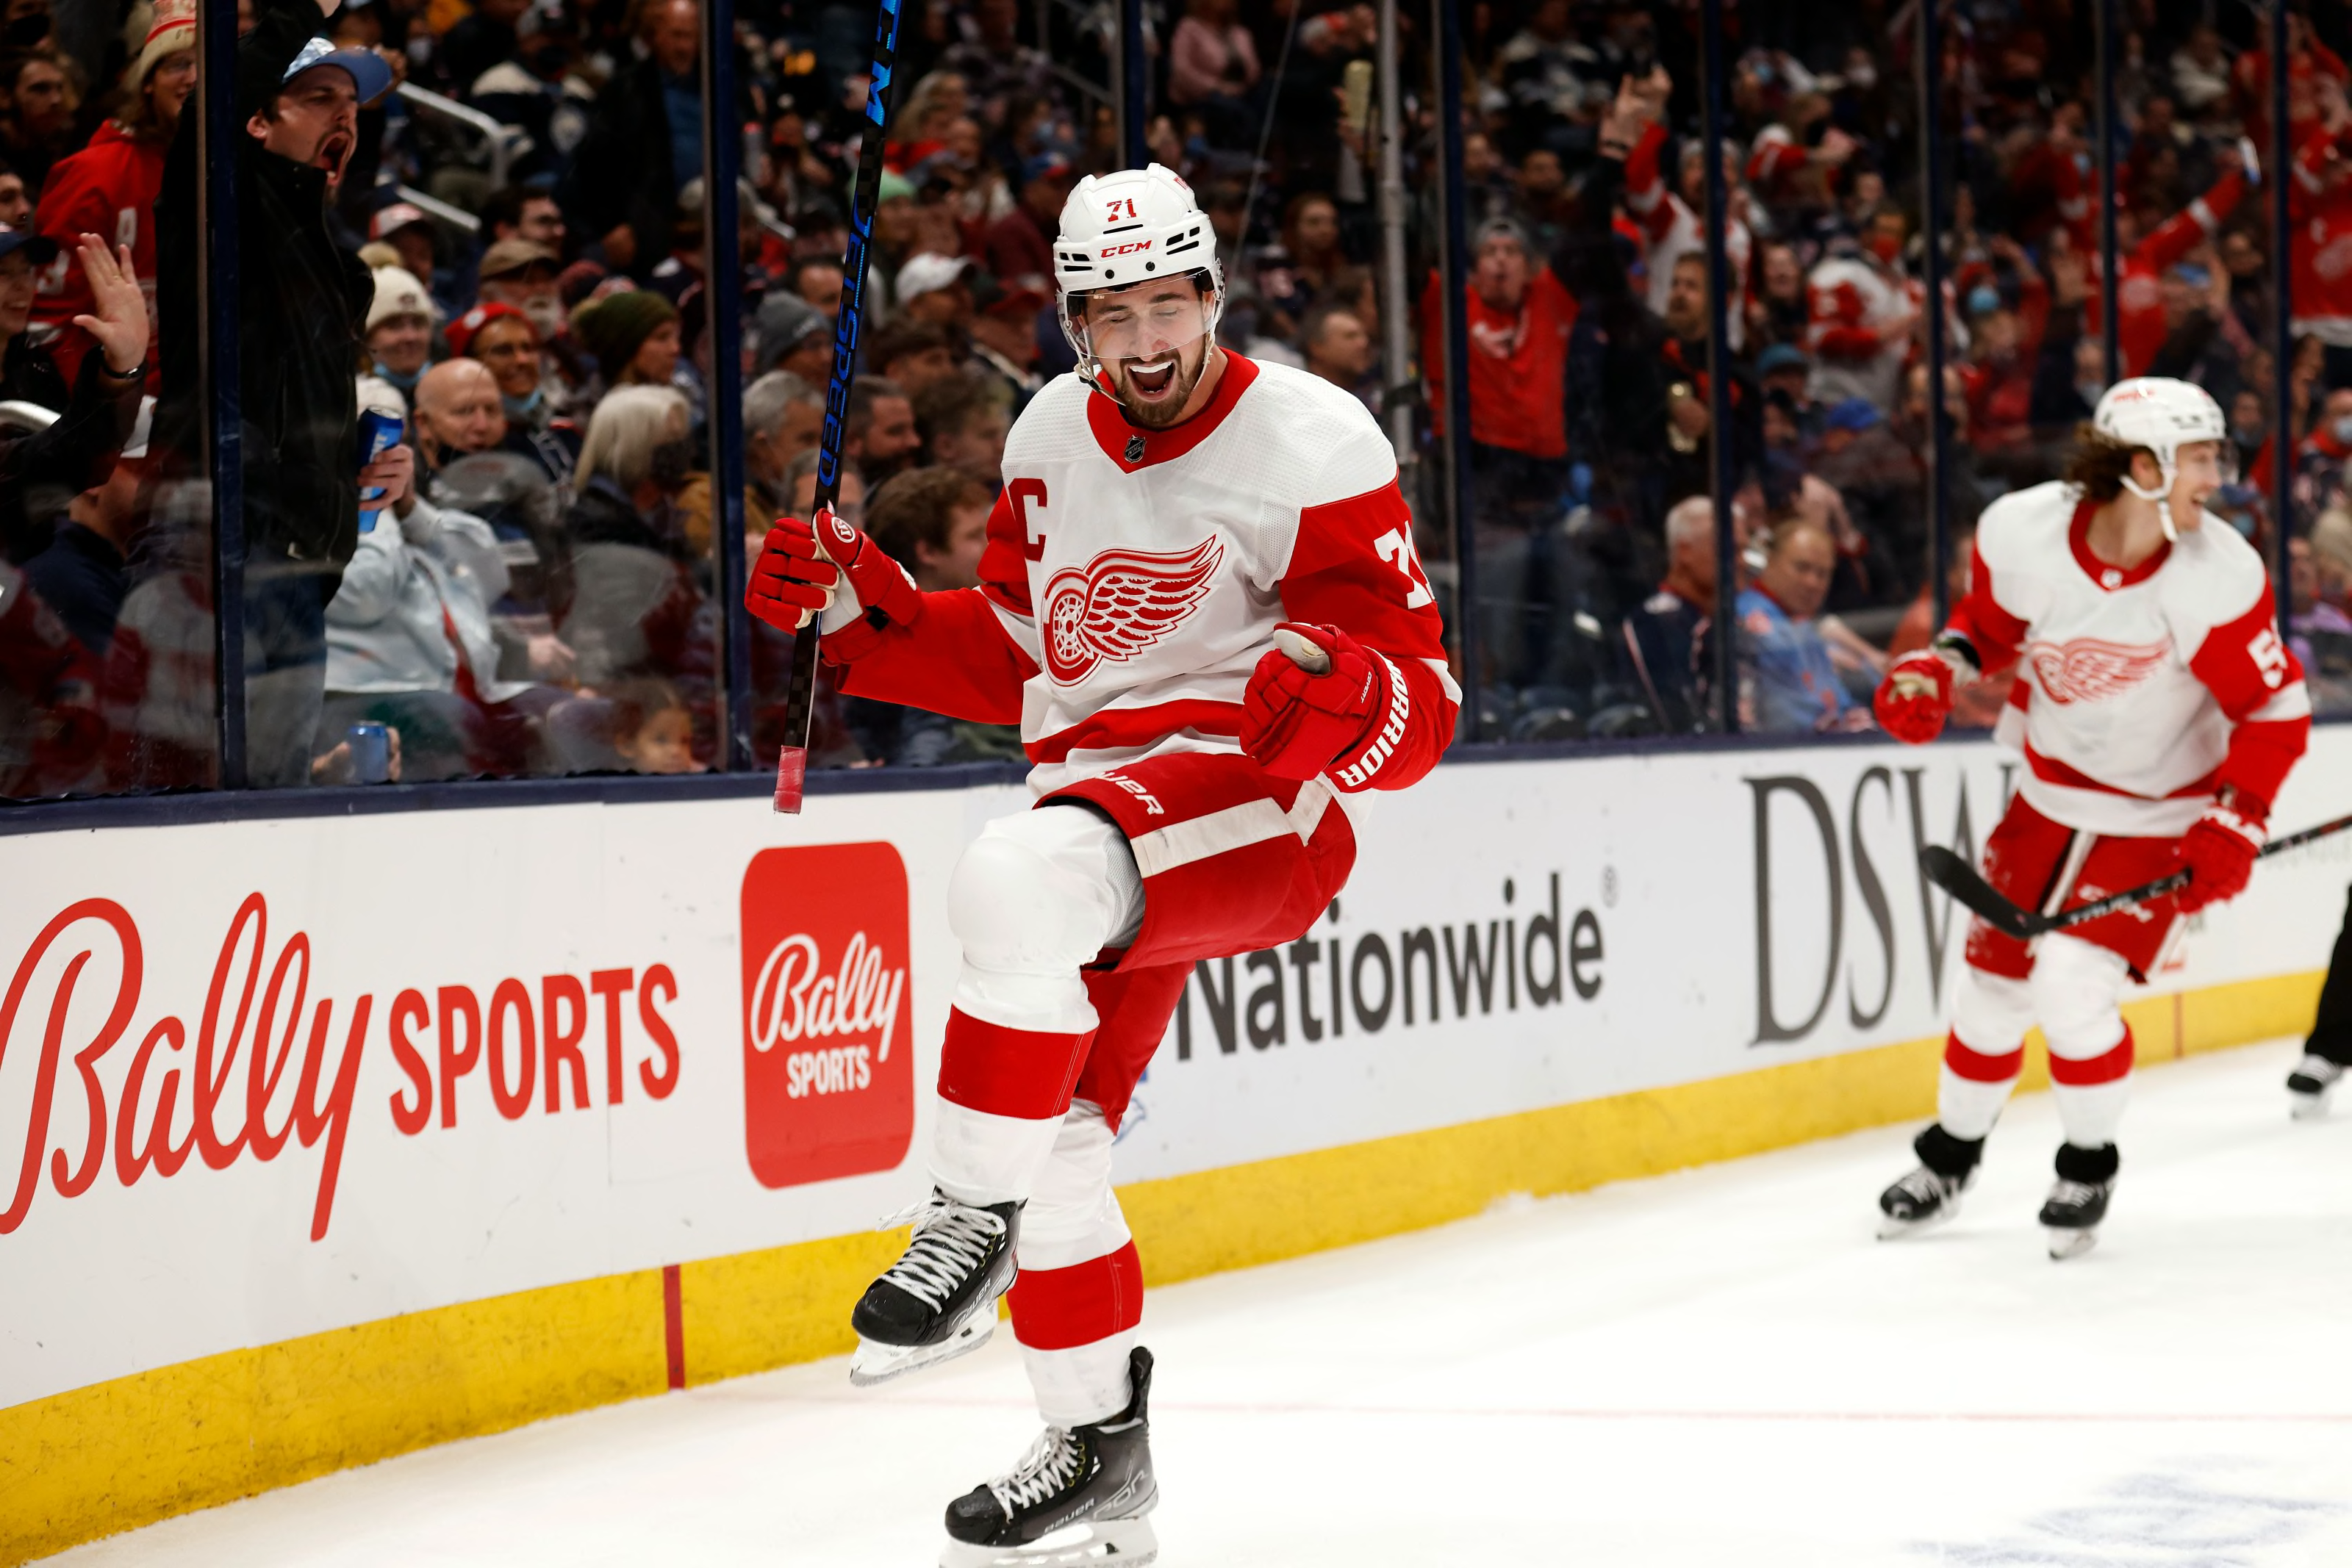 Can the Red Wings continue their improved play in 2022?